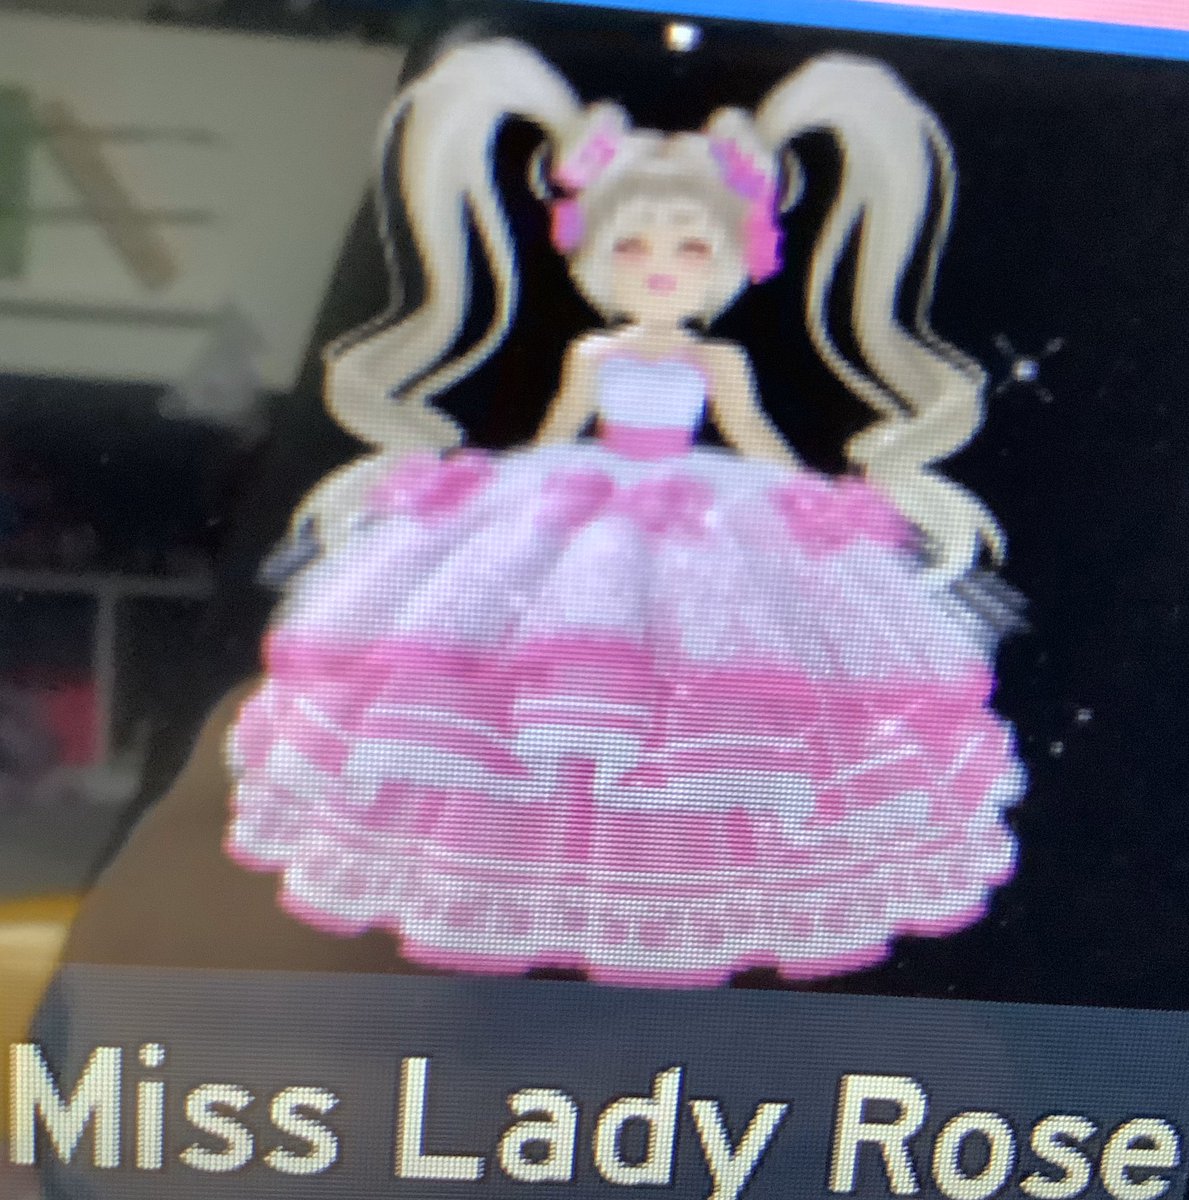 Aniles Art Plays On Twitter Tradingthose Miss Lady Rose Dress Cage Skirt And Magical Guardian Of Love And Justice Skirt For Parasol Or Halo But For Halo I Can Add Royalehightrades Royalehigh Royalehighoutfits